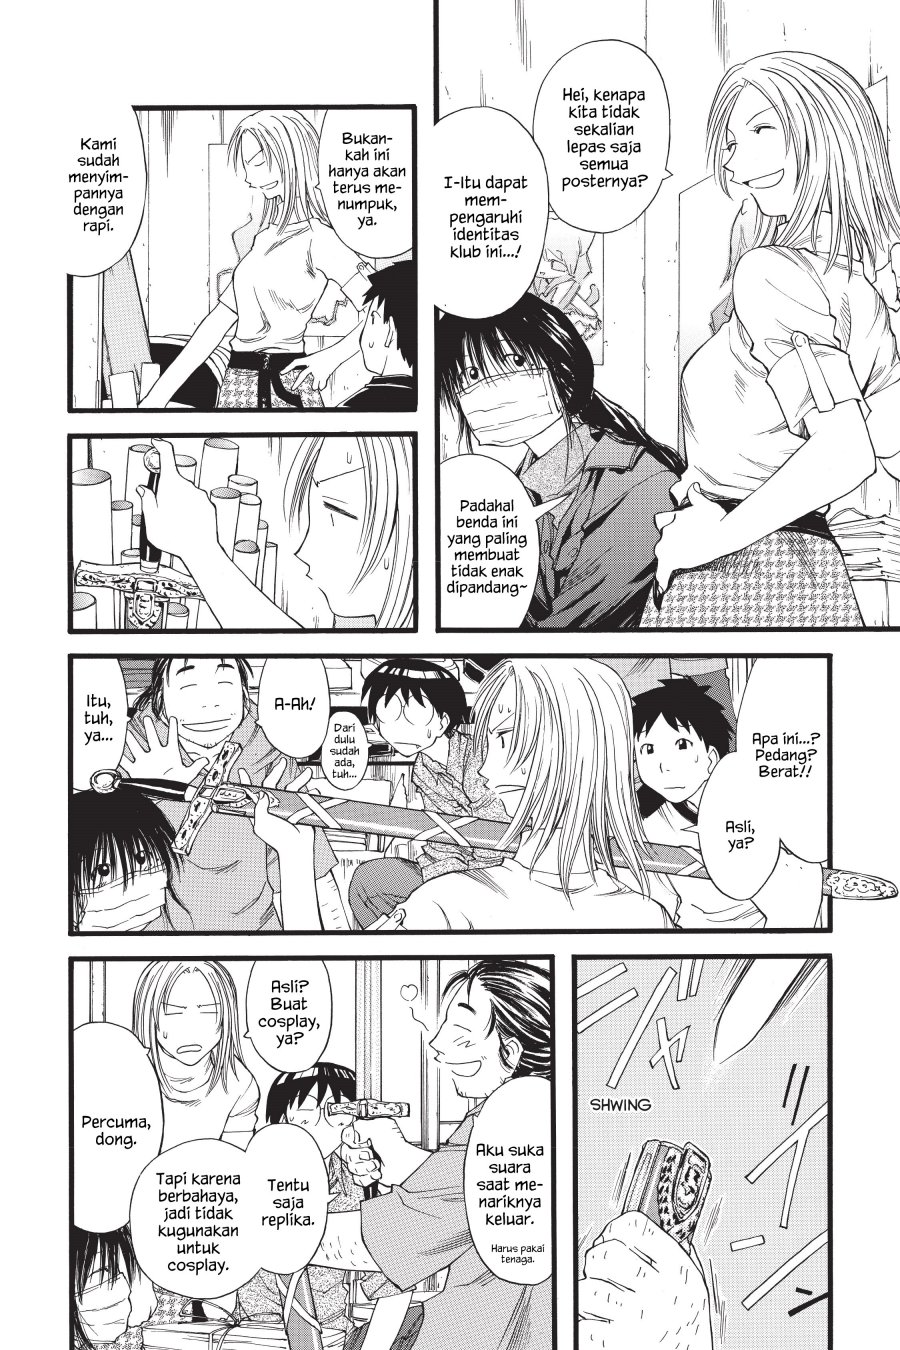 Genshiken – The Society for the Study of Modern Visual Culture Chapter 18 Image 13